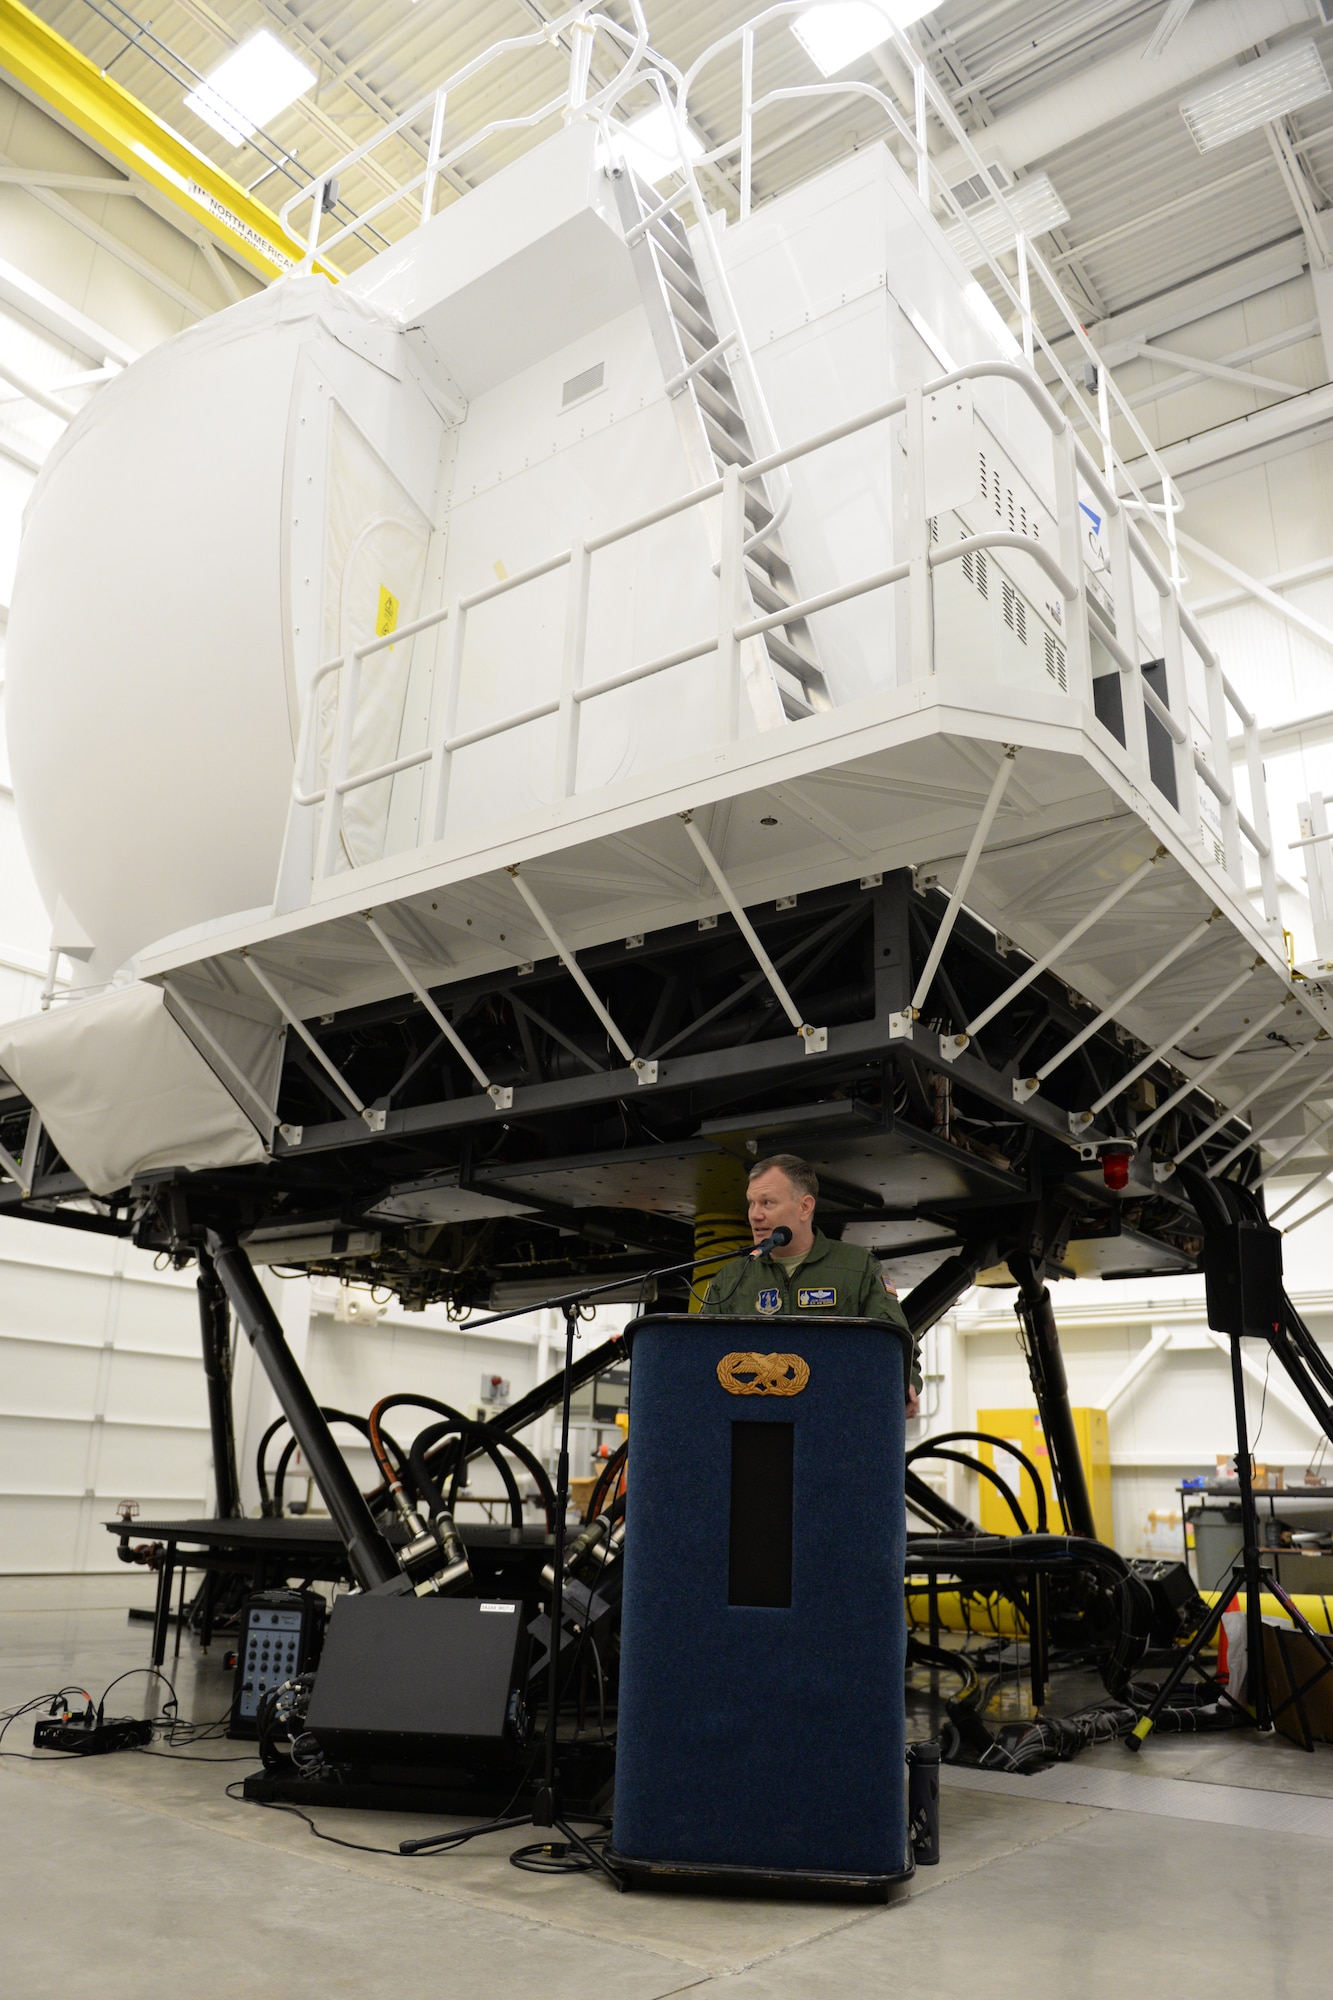 U.S. Air Force Colonel John Pogorek, 157th Operations Group commander, New Hampshire Air National Guard, speaks during the retirement of the KC-135 flight simulator from Pease Air National Guard Base, New Hampshire, March, 9, 2016.  The simulator is being retired to make way for a new KC-46 weapons trainer slated to arrive in the spring of 2017. (U.S. Air National Guard photo by Staff Sgt. Curtis J. Lenz)